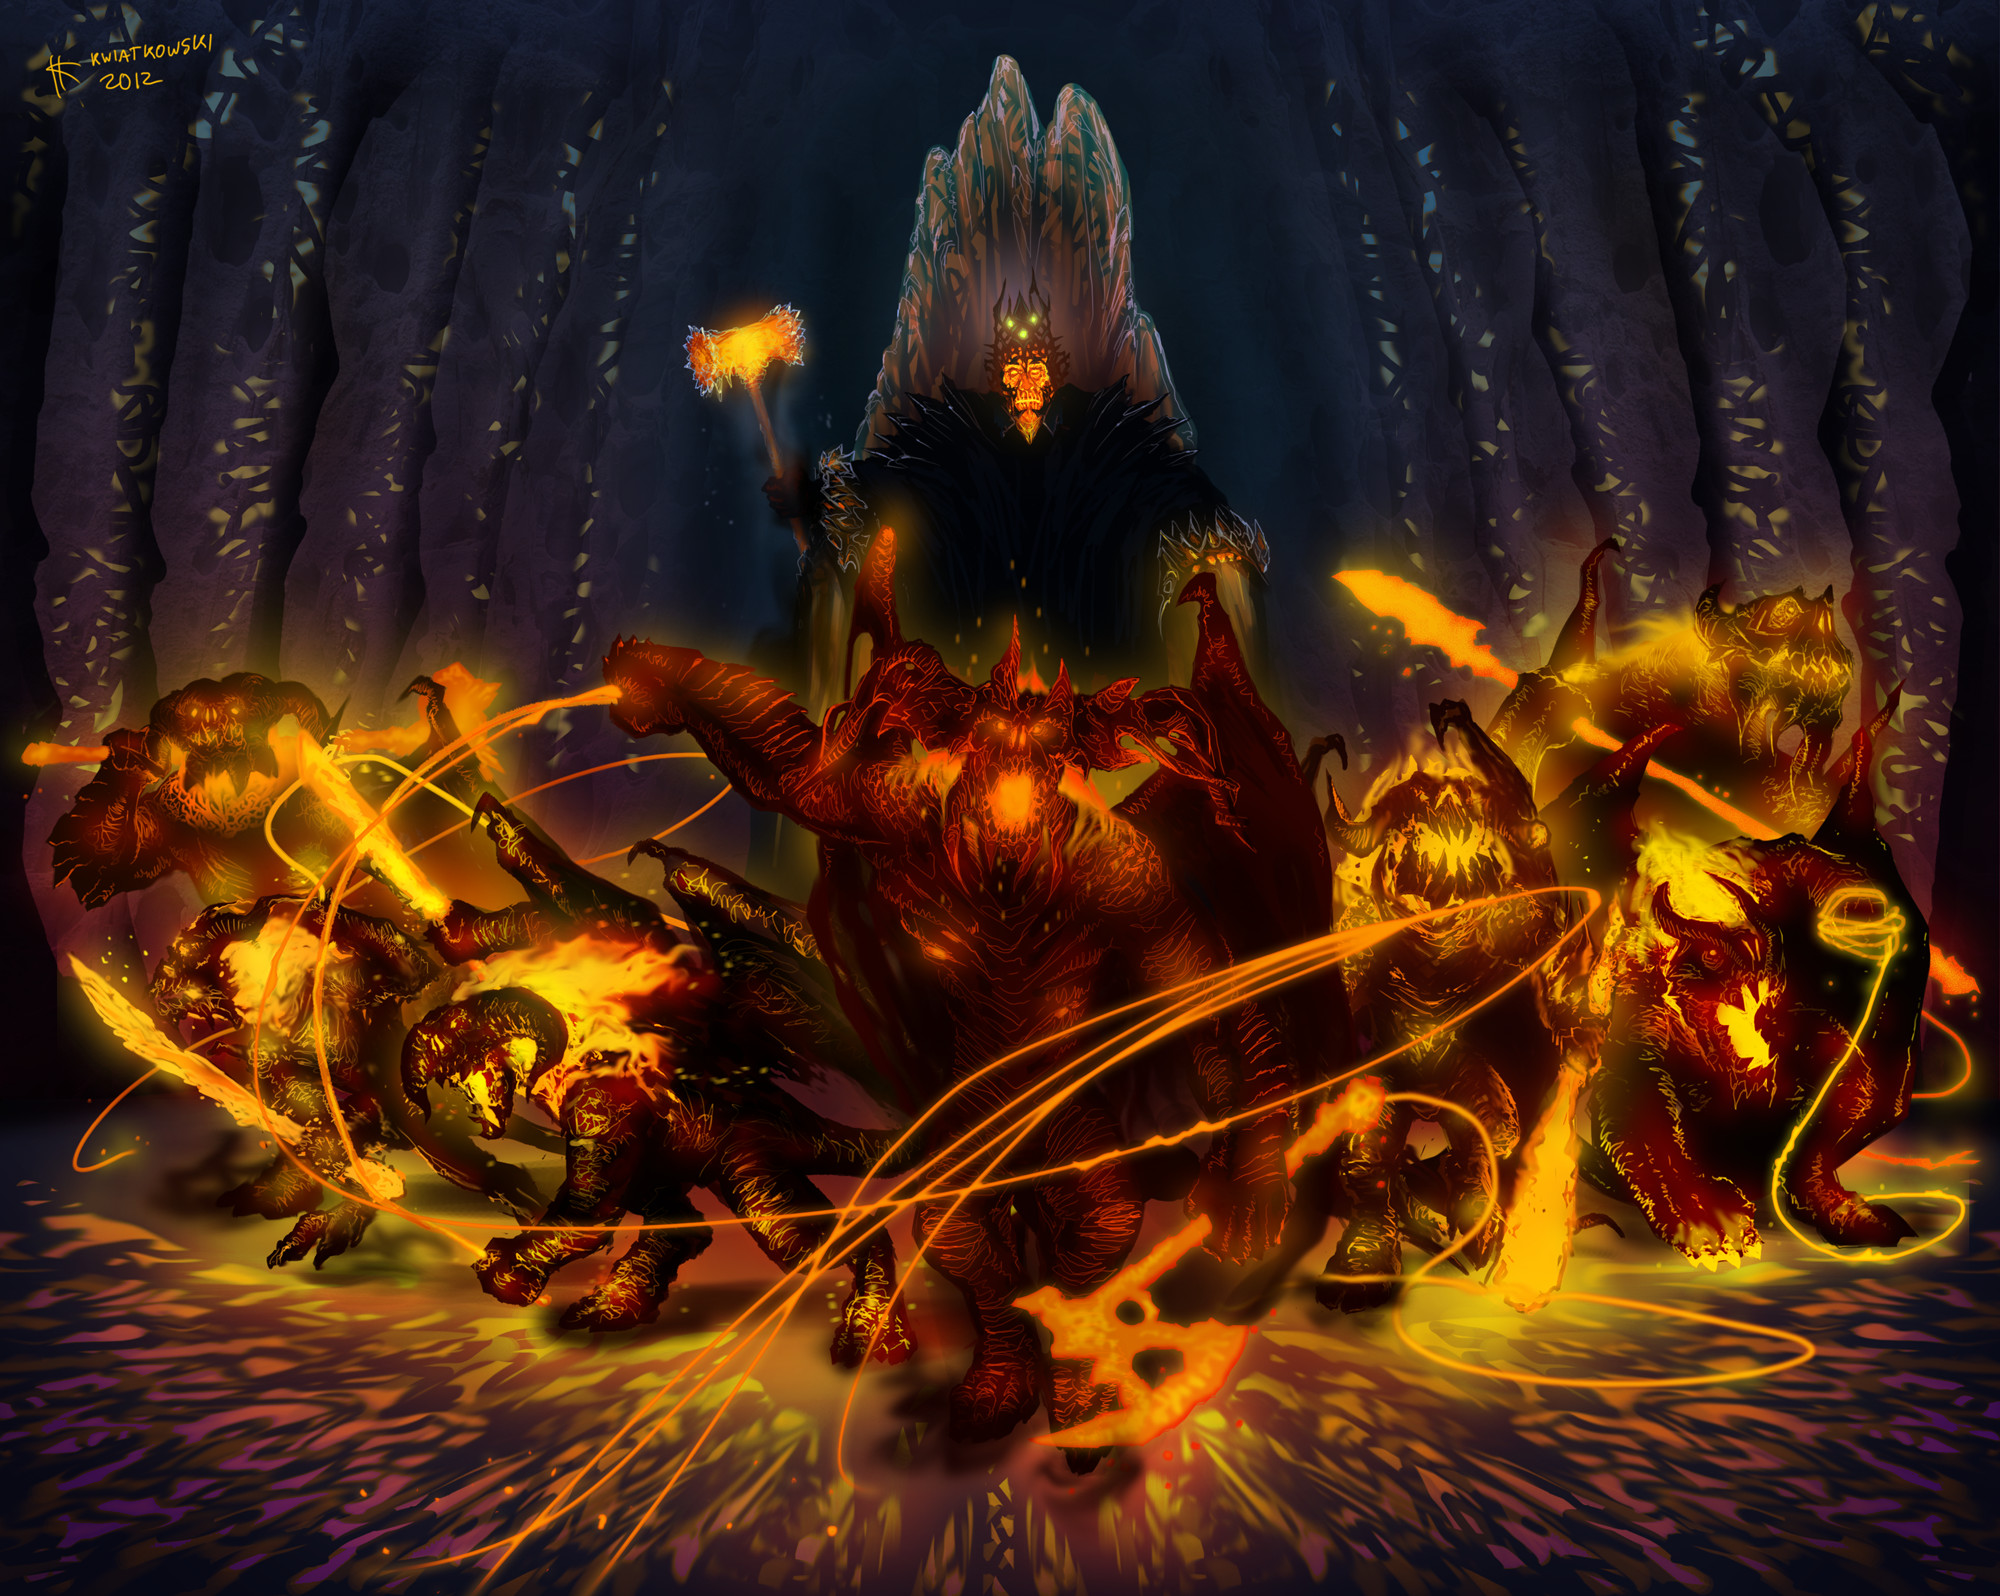 2000x1596 Morgoth and his guardians -terryfying Balrogs with their leader, Gothmog.  Fan art illustration, based on J.R Tolkien's "Silmarillion", and balrog  look.